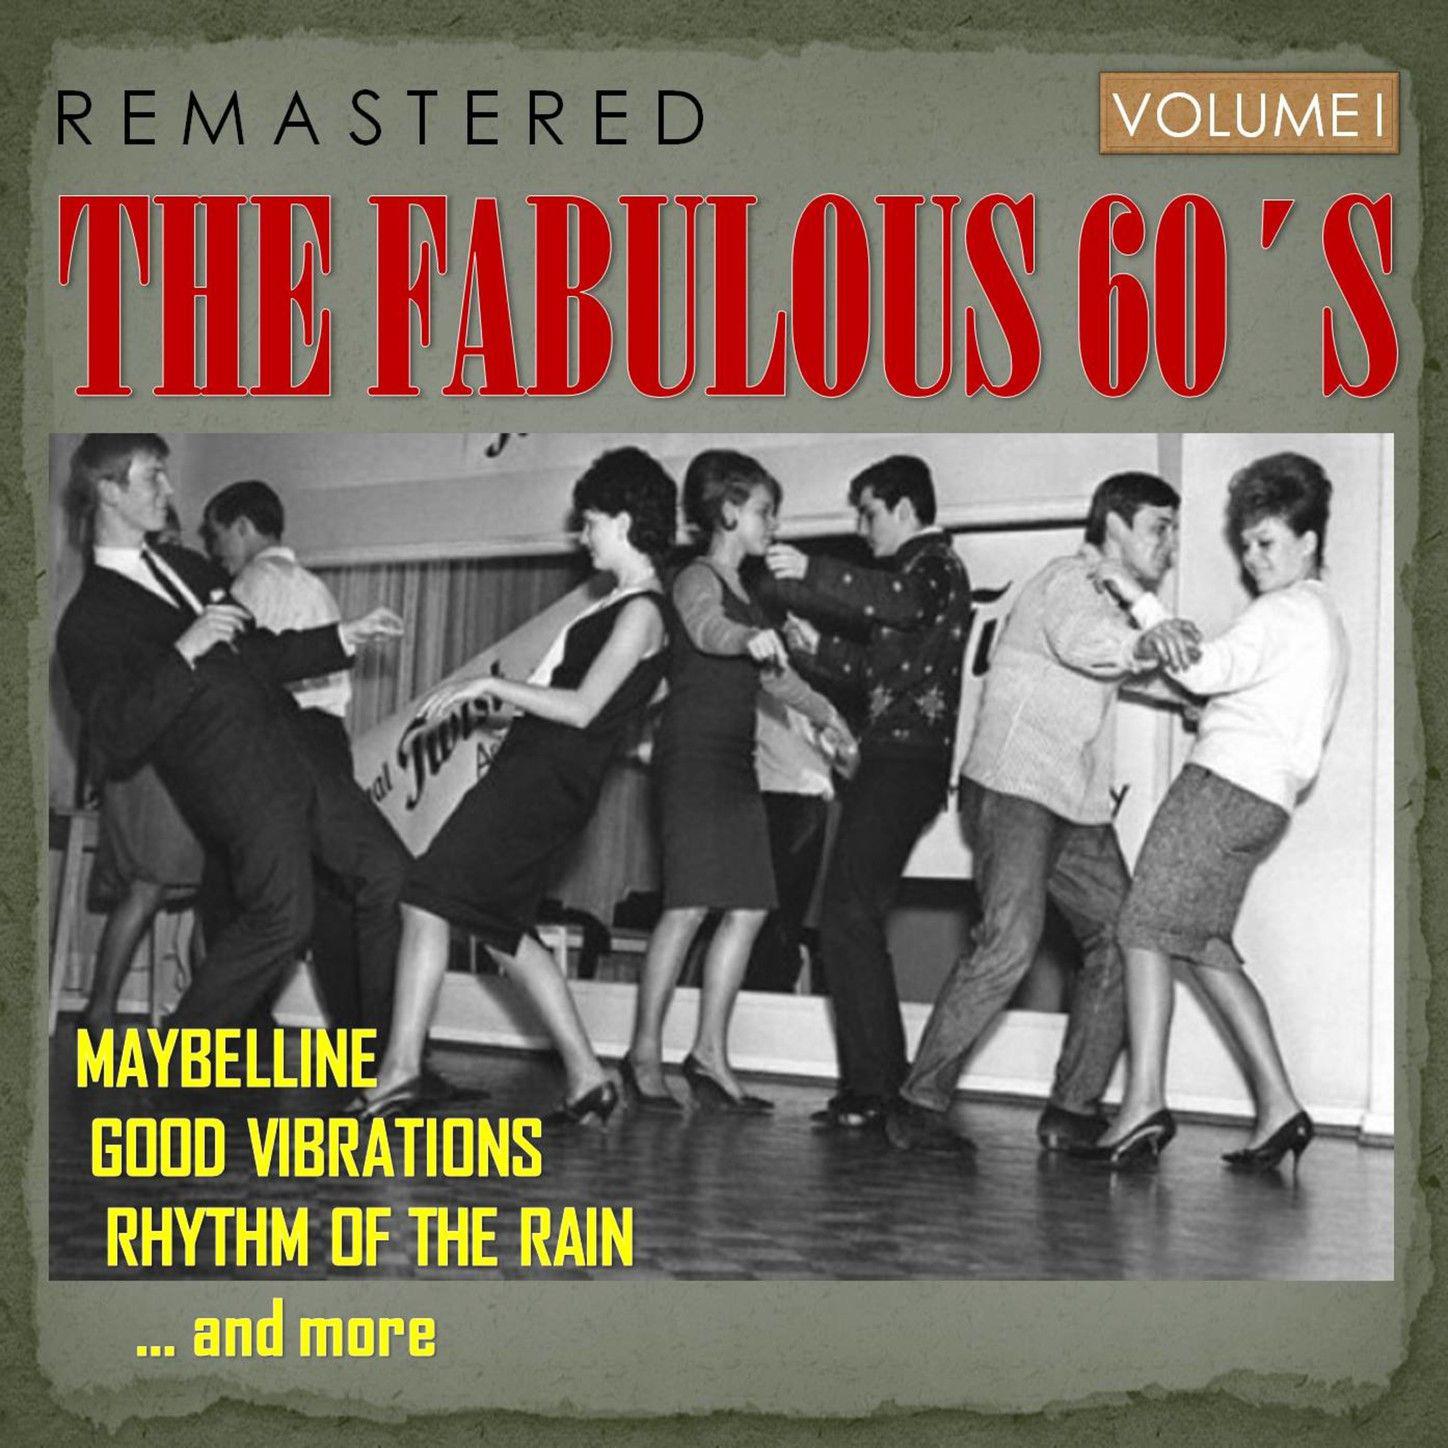 The Fabulous 60's, Vol. I (Remastered)